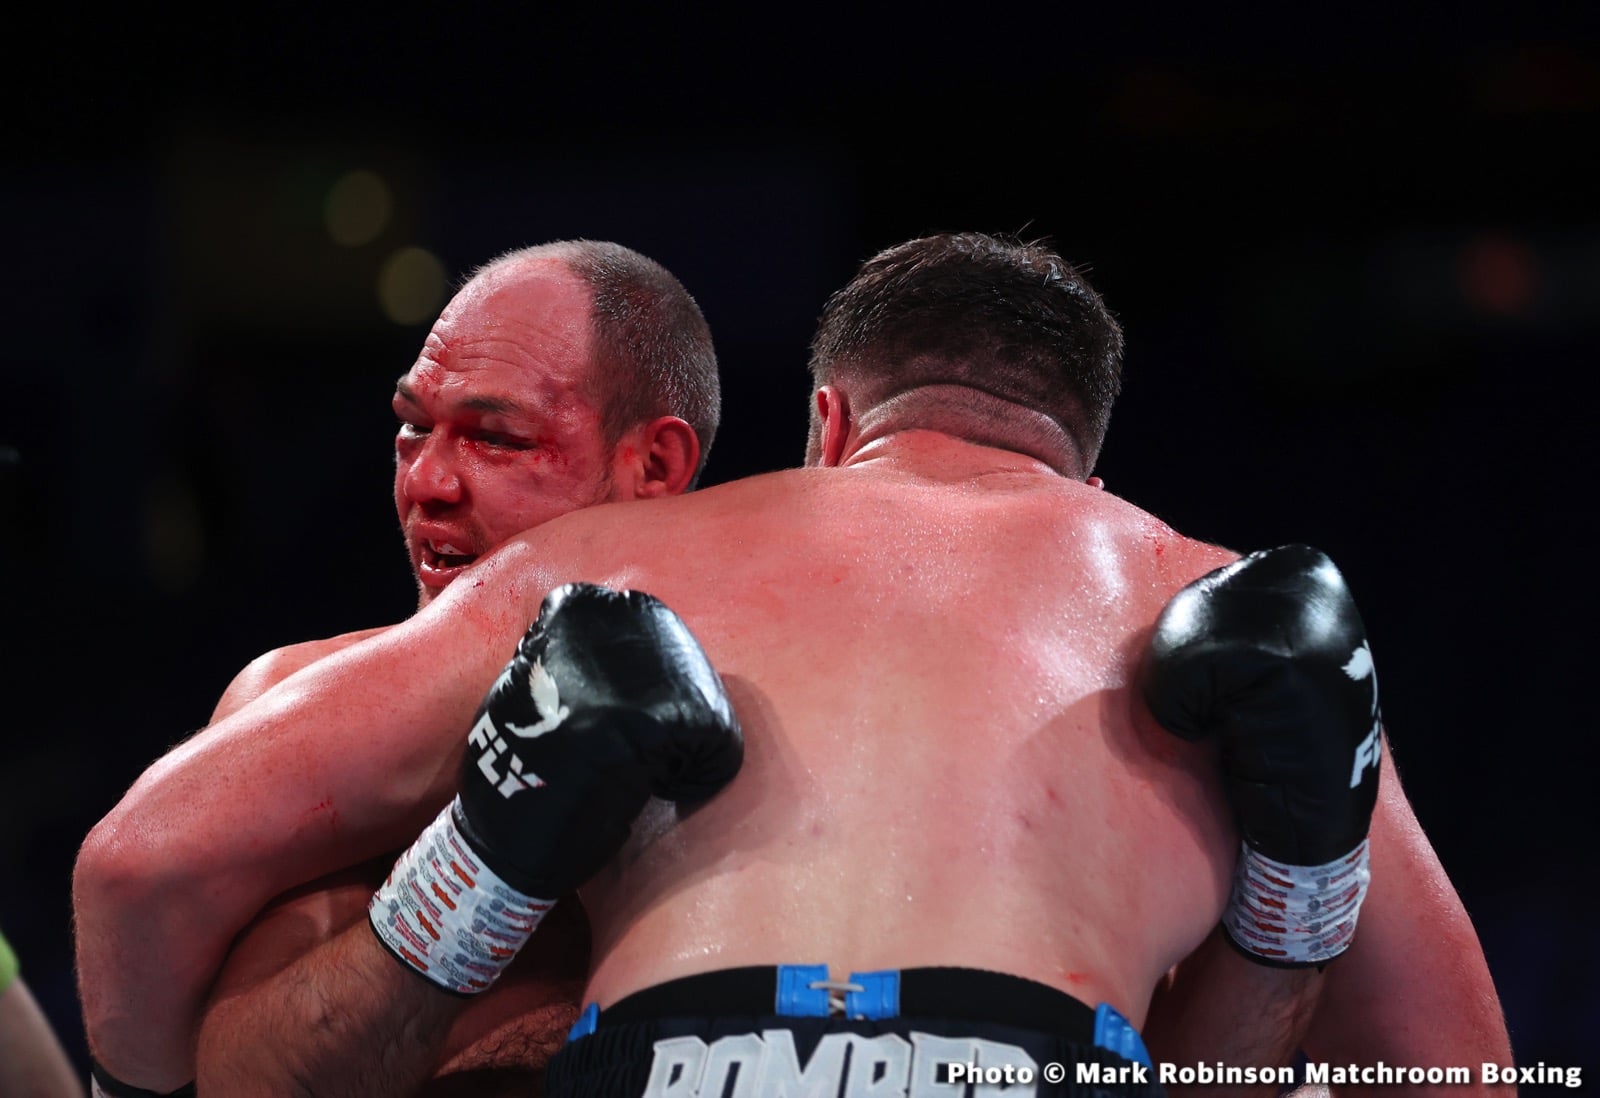 Image: Cameron Defeats McGee, Babic Stops Molina - Live Results From London, UK